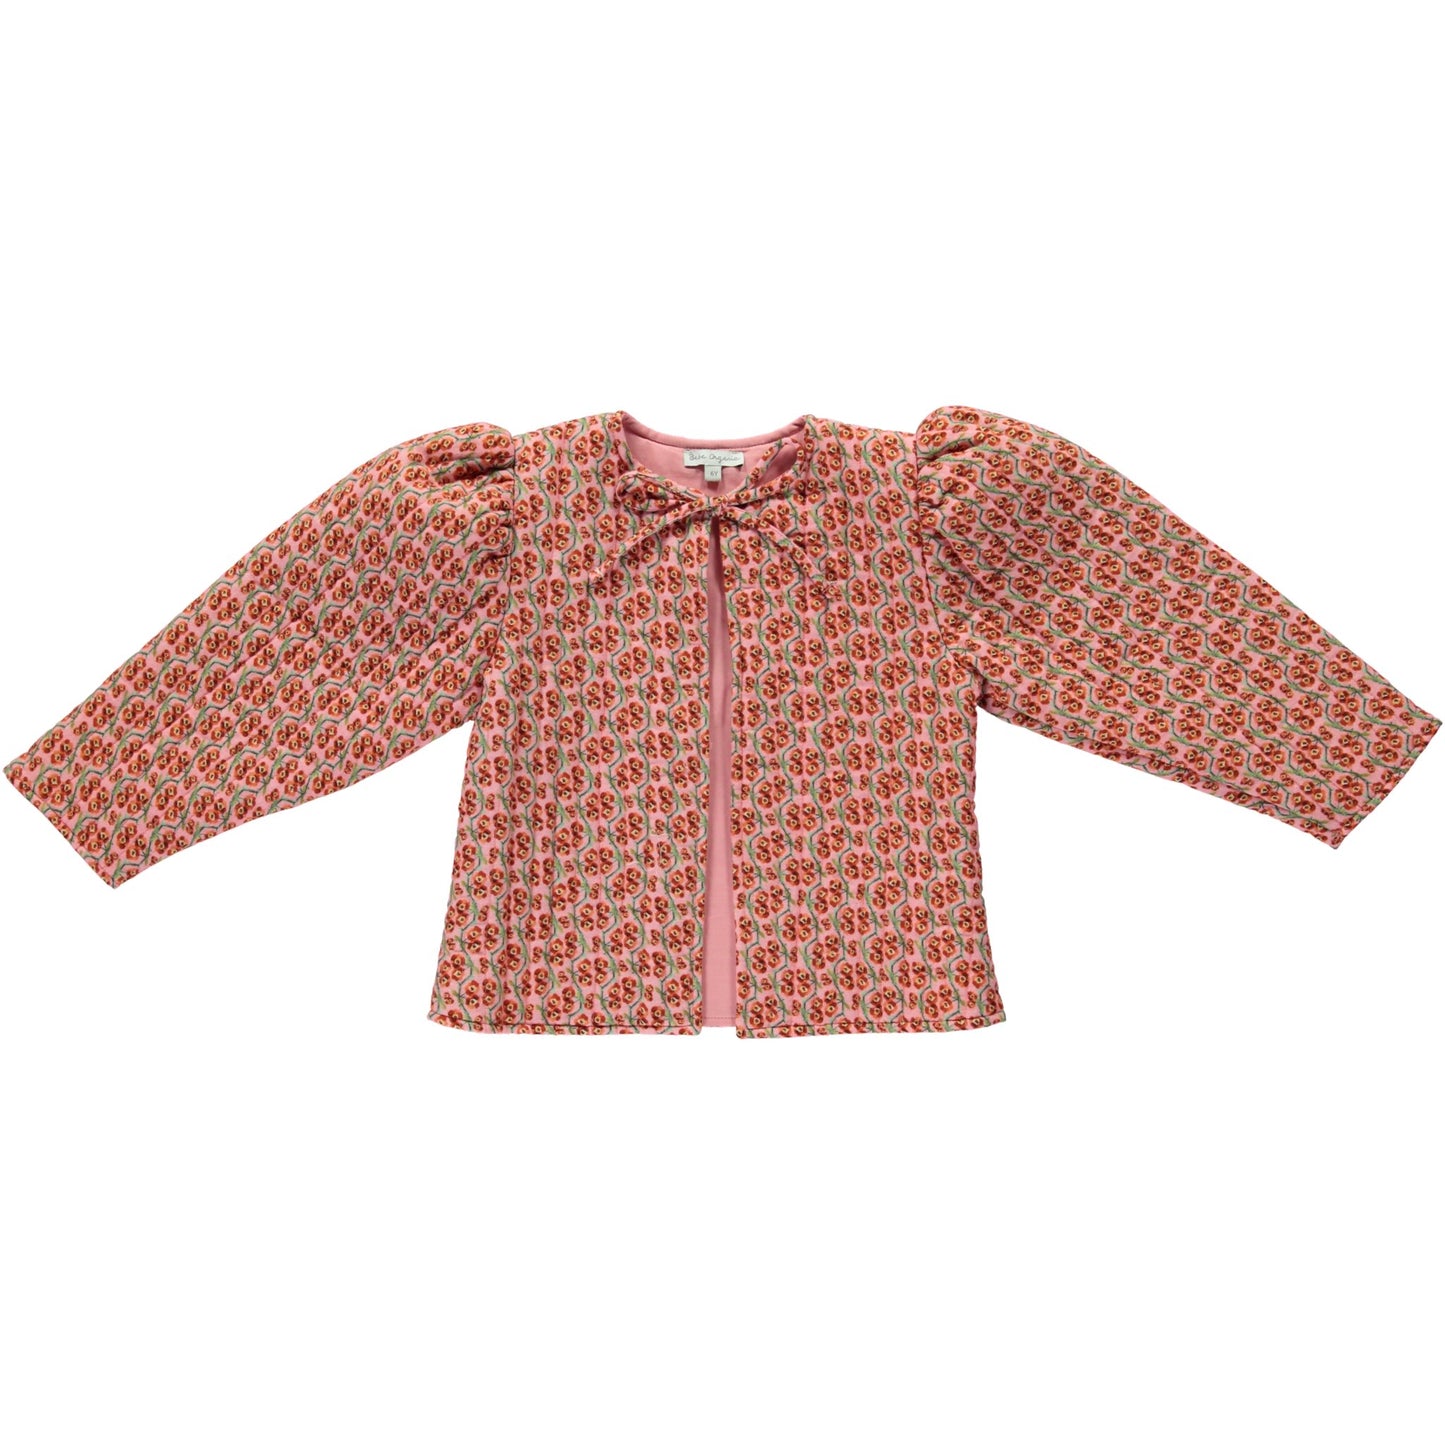 Matilde quilted jacket Outerwear Bebe Organic 